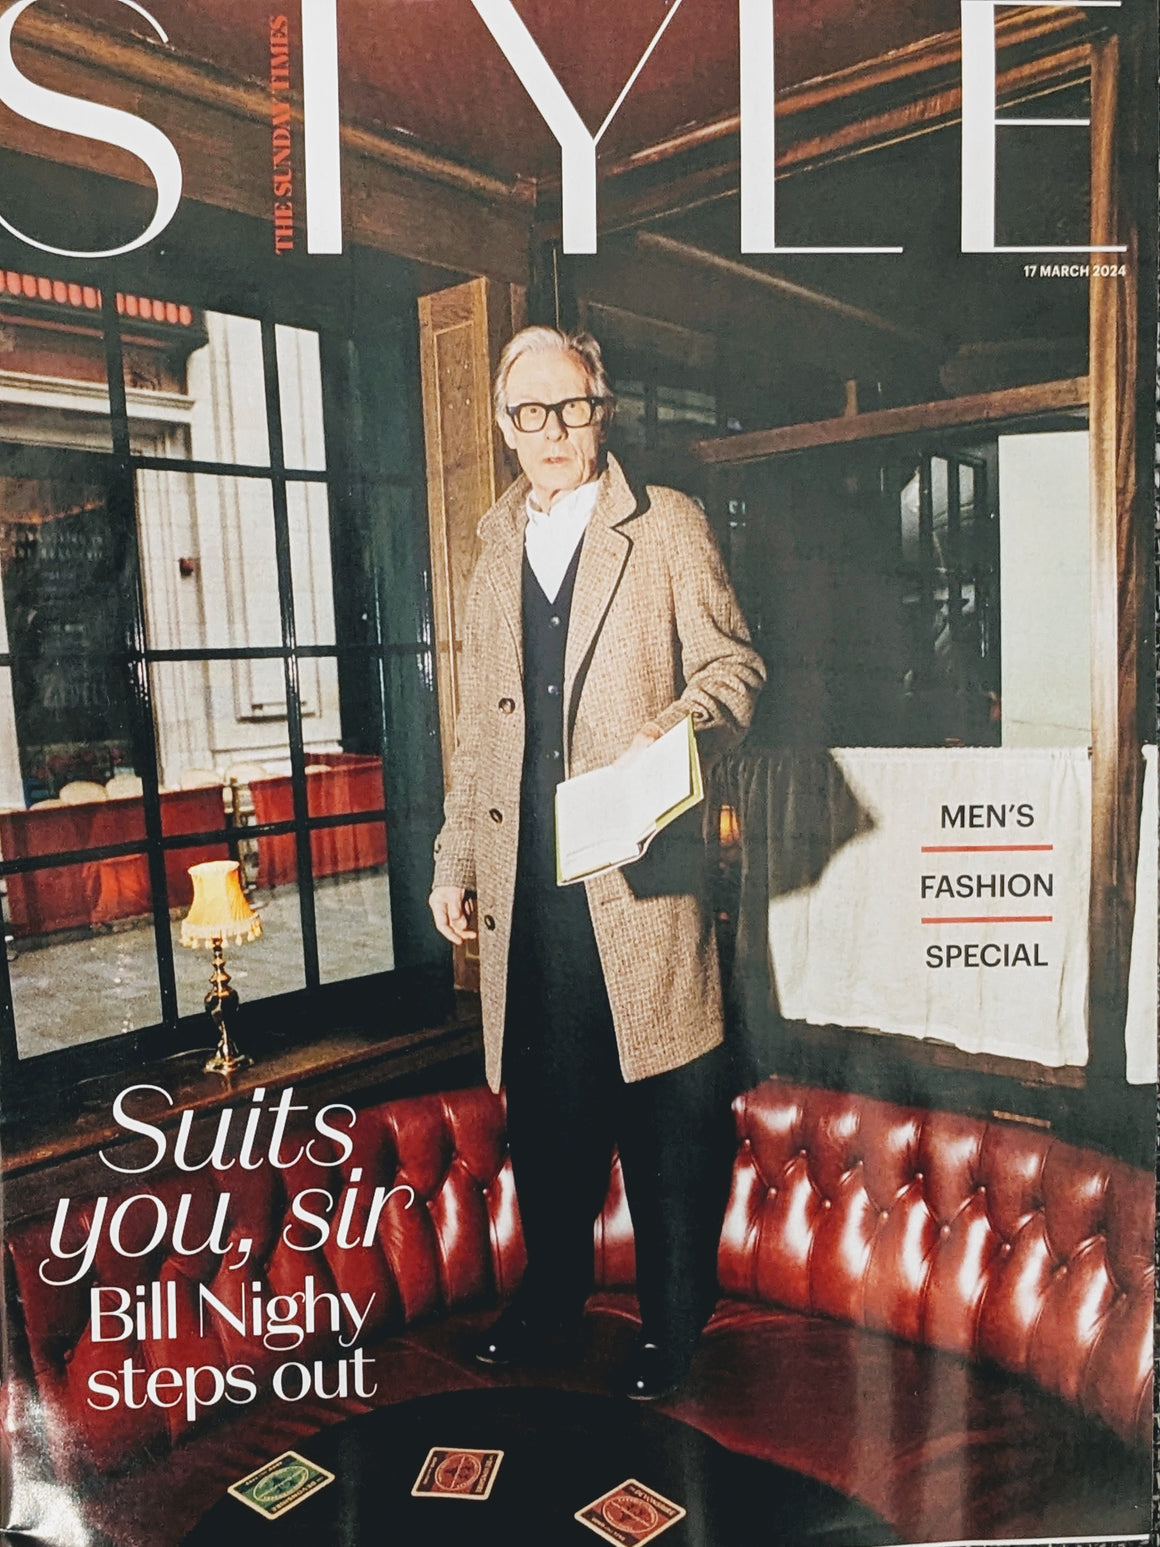 STYLE Magazine 17 March 2024 BILL NIGHY COVER FEATURE David Gandy